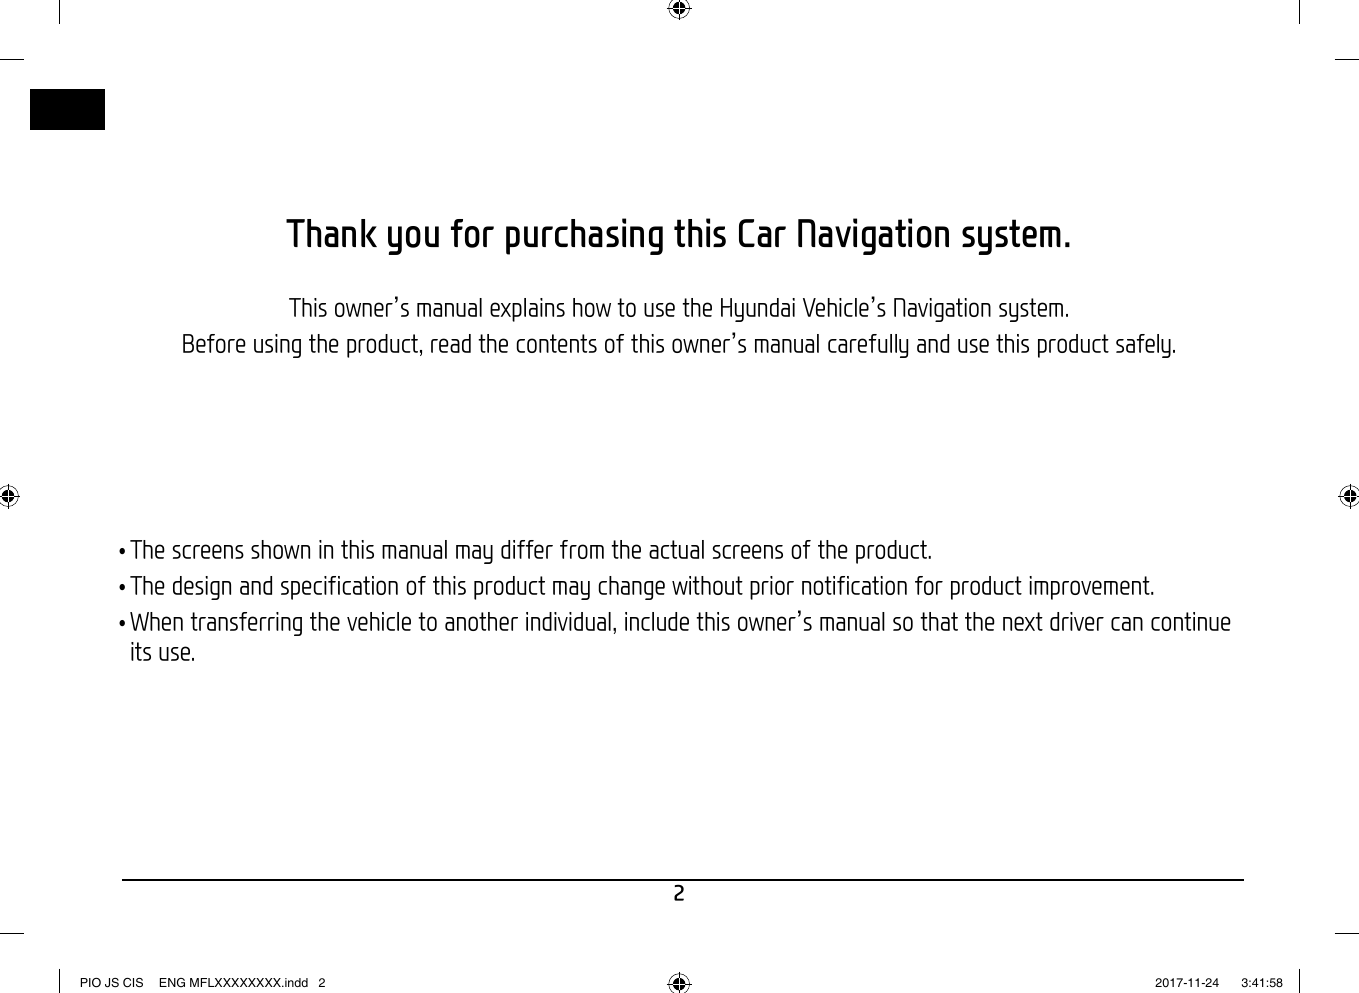 2Thank you for purchasing this Car Navigation system.This owner’s manual explains how to use the Hyundai Vehicle’s Navigation system.Before using the product, read the contents of this owner’s manual carefully and use this product safely. •The screens shown in this manual may differ from the actual screens of the product. •The design and specification of this product may change without prior notification for product improvement. •When transferring the vehicle to another individual, include this owner’s manual so that the next driver can continue its use.PIO JS CIS  ENG MFLXXXXXXXX.indd   2PIO JS CIS  ENG MFLXXXXXXXX.indd   2 2017-11-24    3:41:582017-11-24    3:41:58